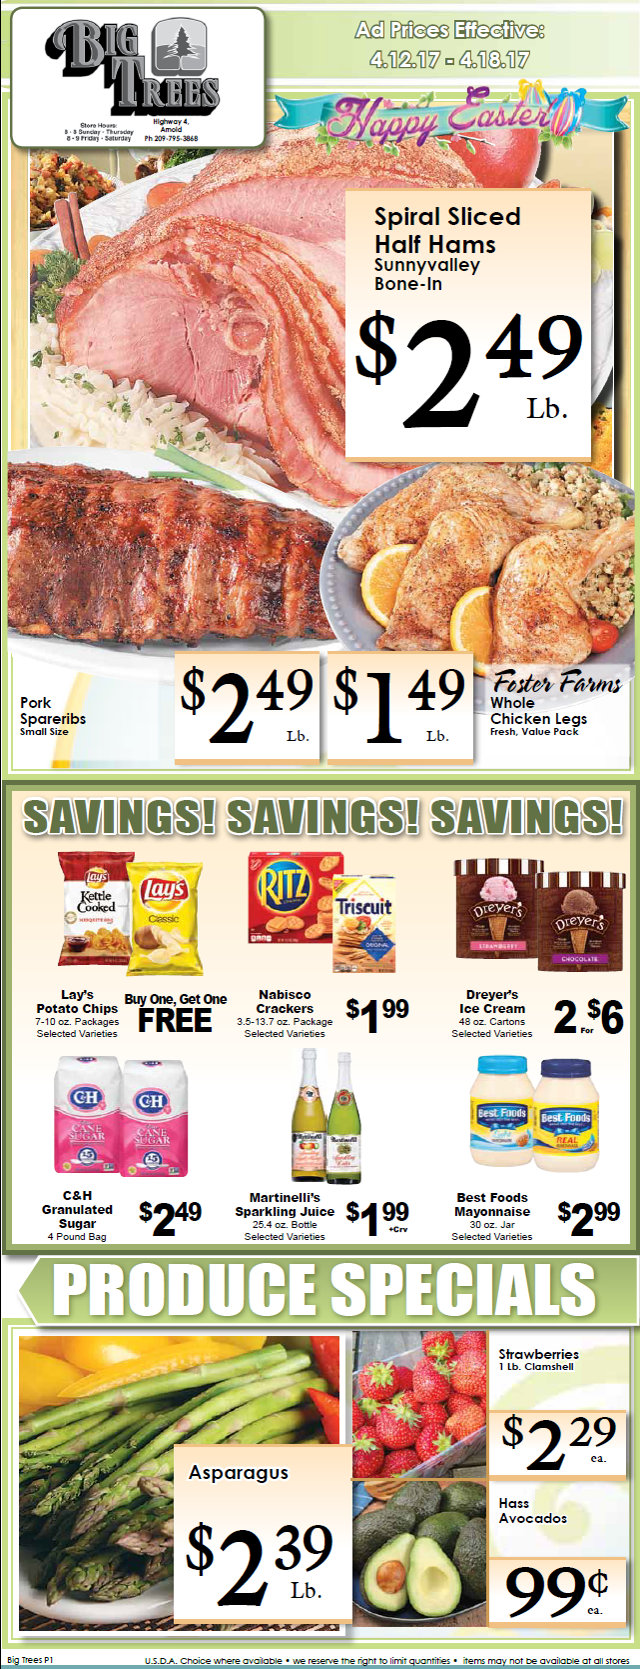 Big Trees Market Weekly Grocery Ad & Specials Through April 18